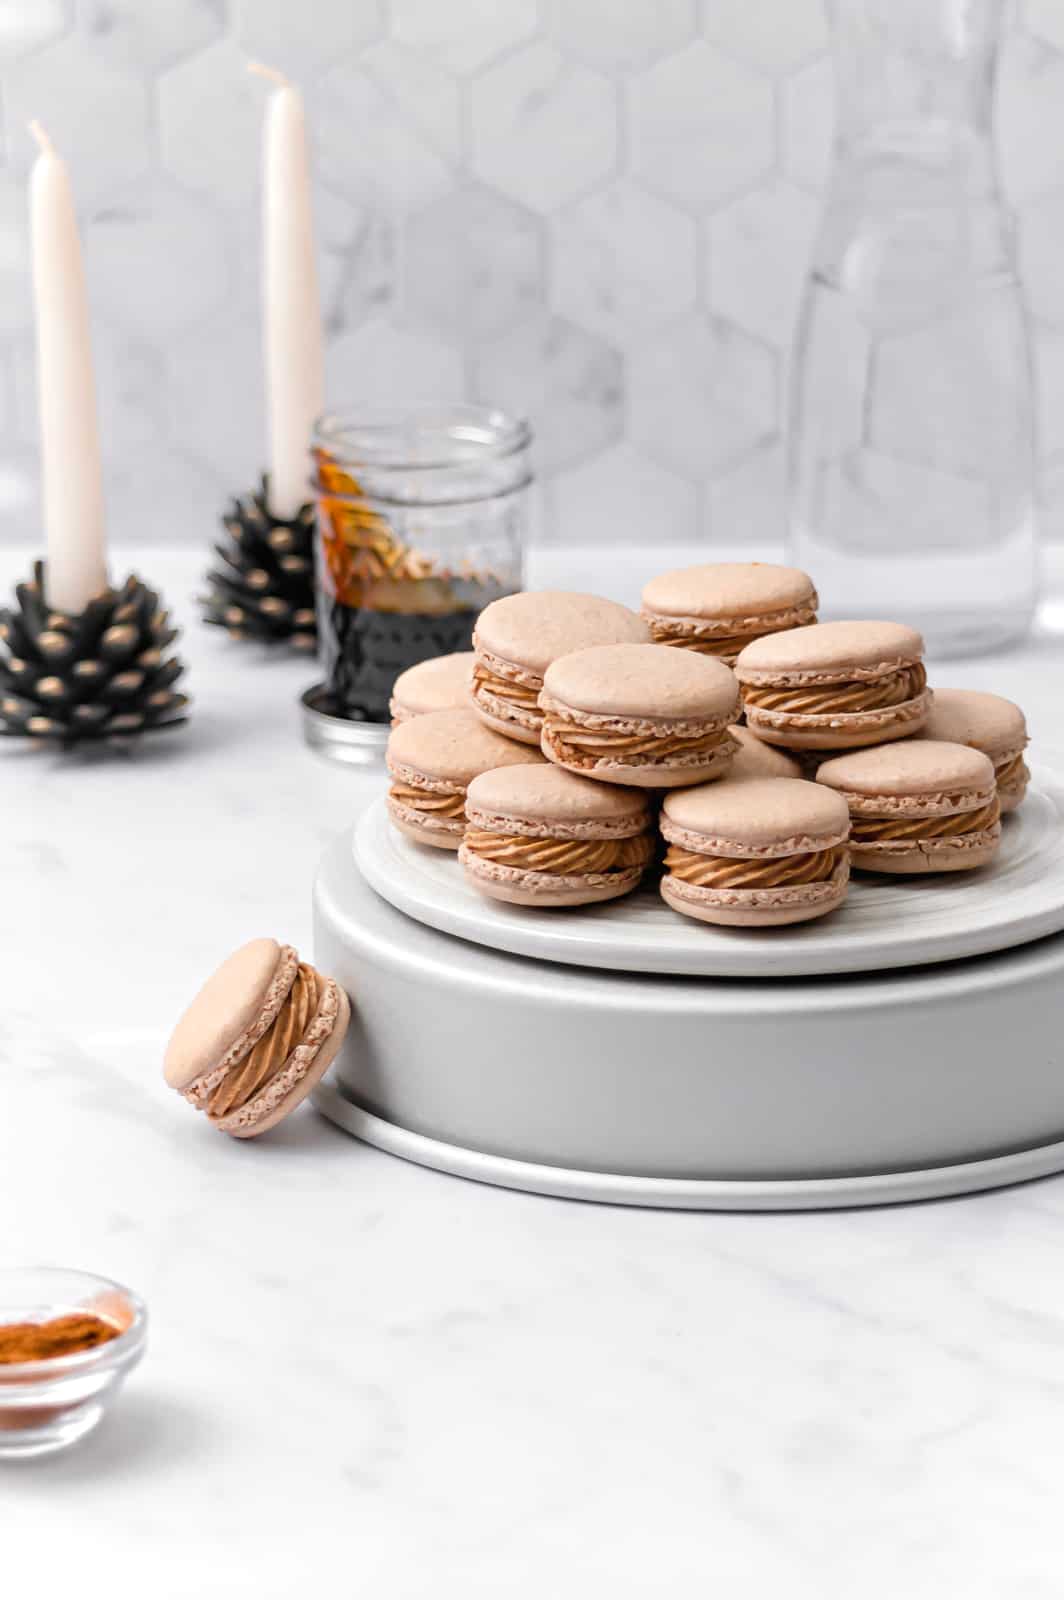 macarons stacked on top of overturned cake pan with candles and a jar of molasses in the background.